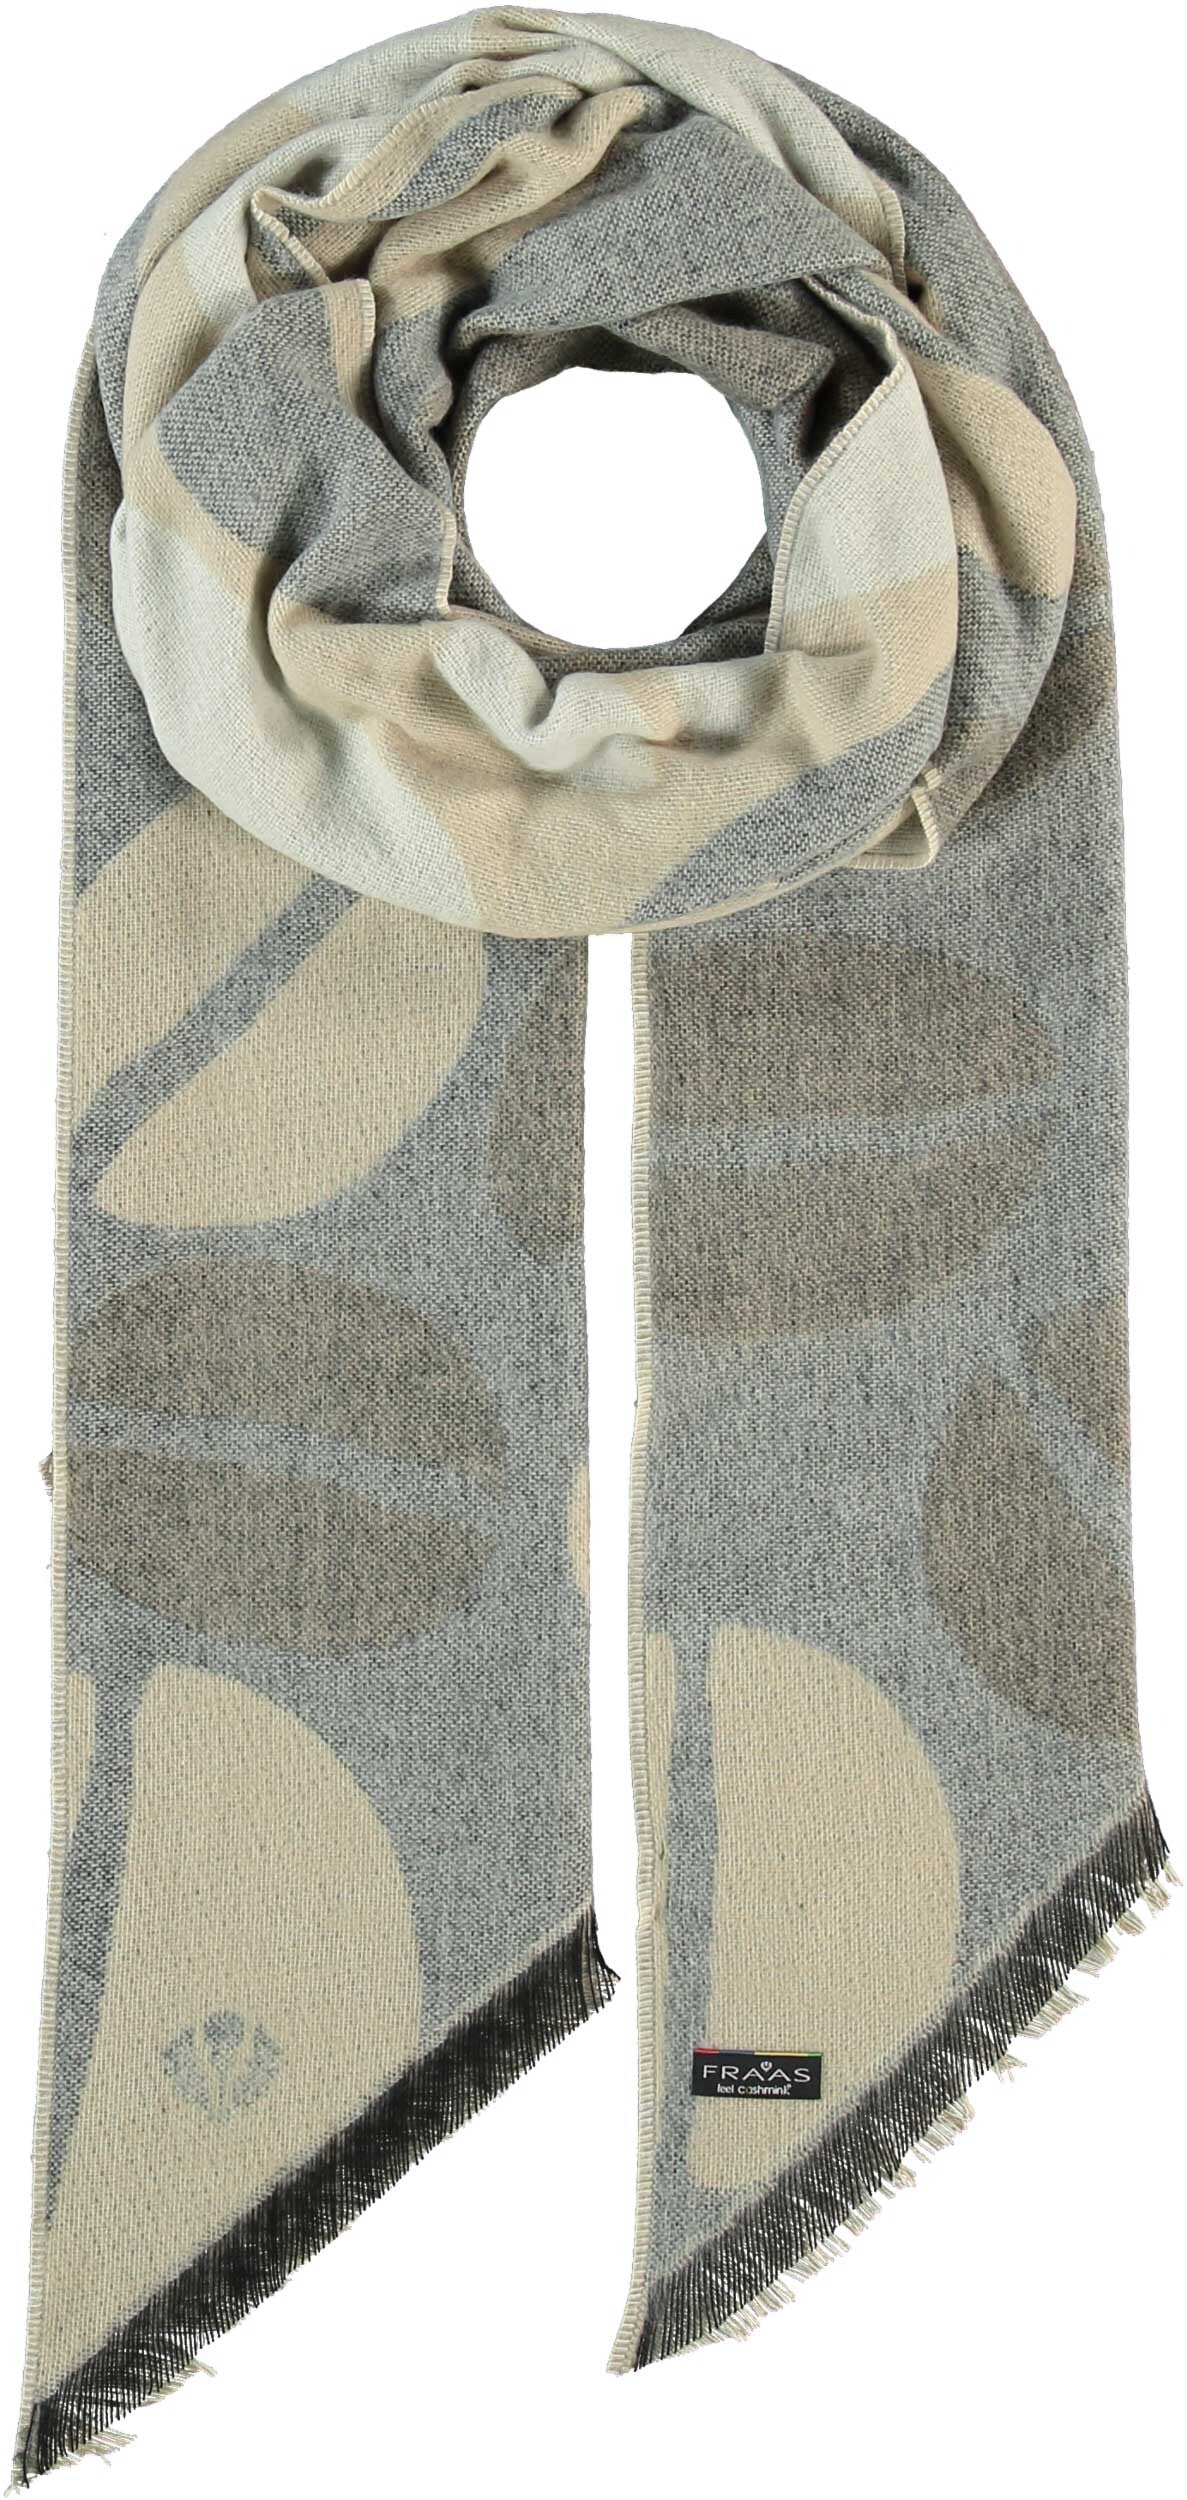 FRAAS Sustainability Edition Reversible Coco Bias Scarf